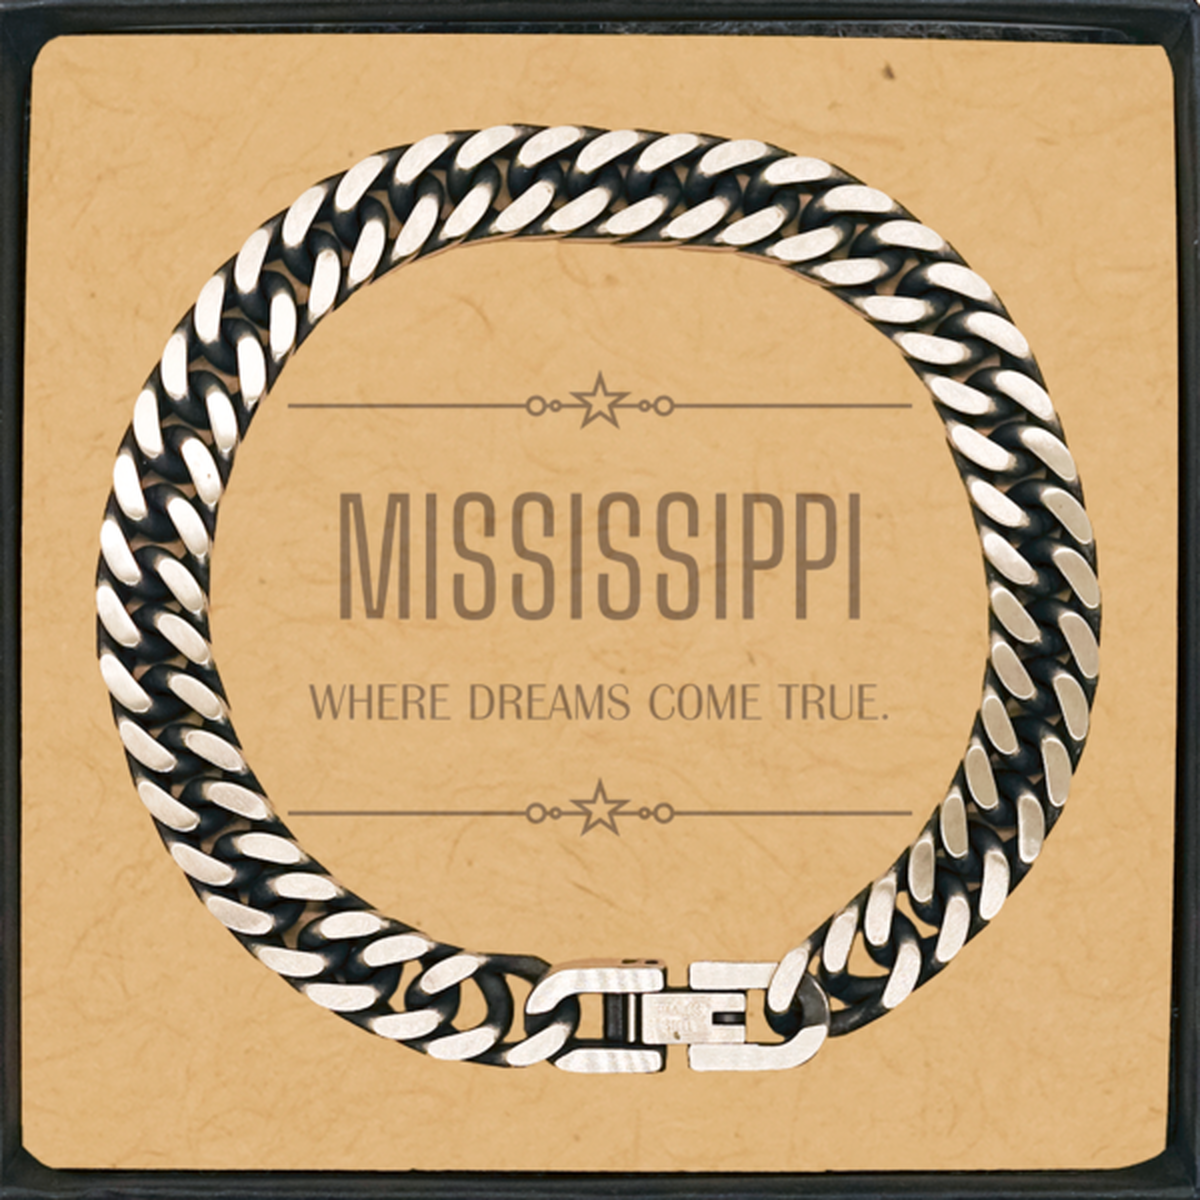 Love Mississippi State Cuban Link Chain Bracelet, Mississippi Where dreams come true, Birthday Inspirational Gifts For Mississippi Men, Women, Friends